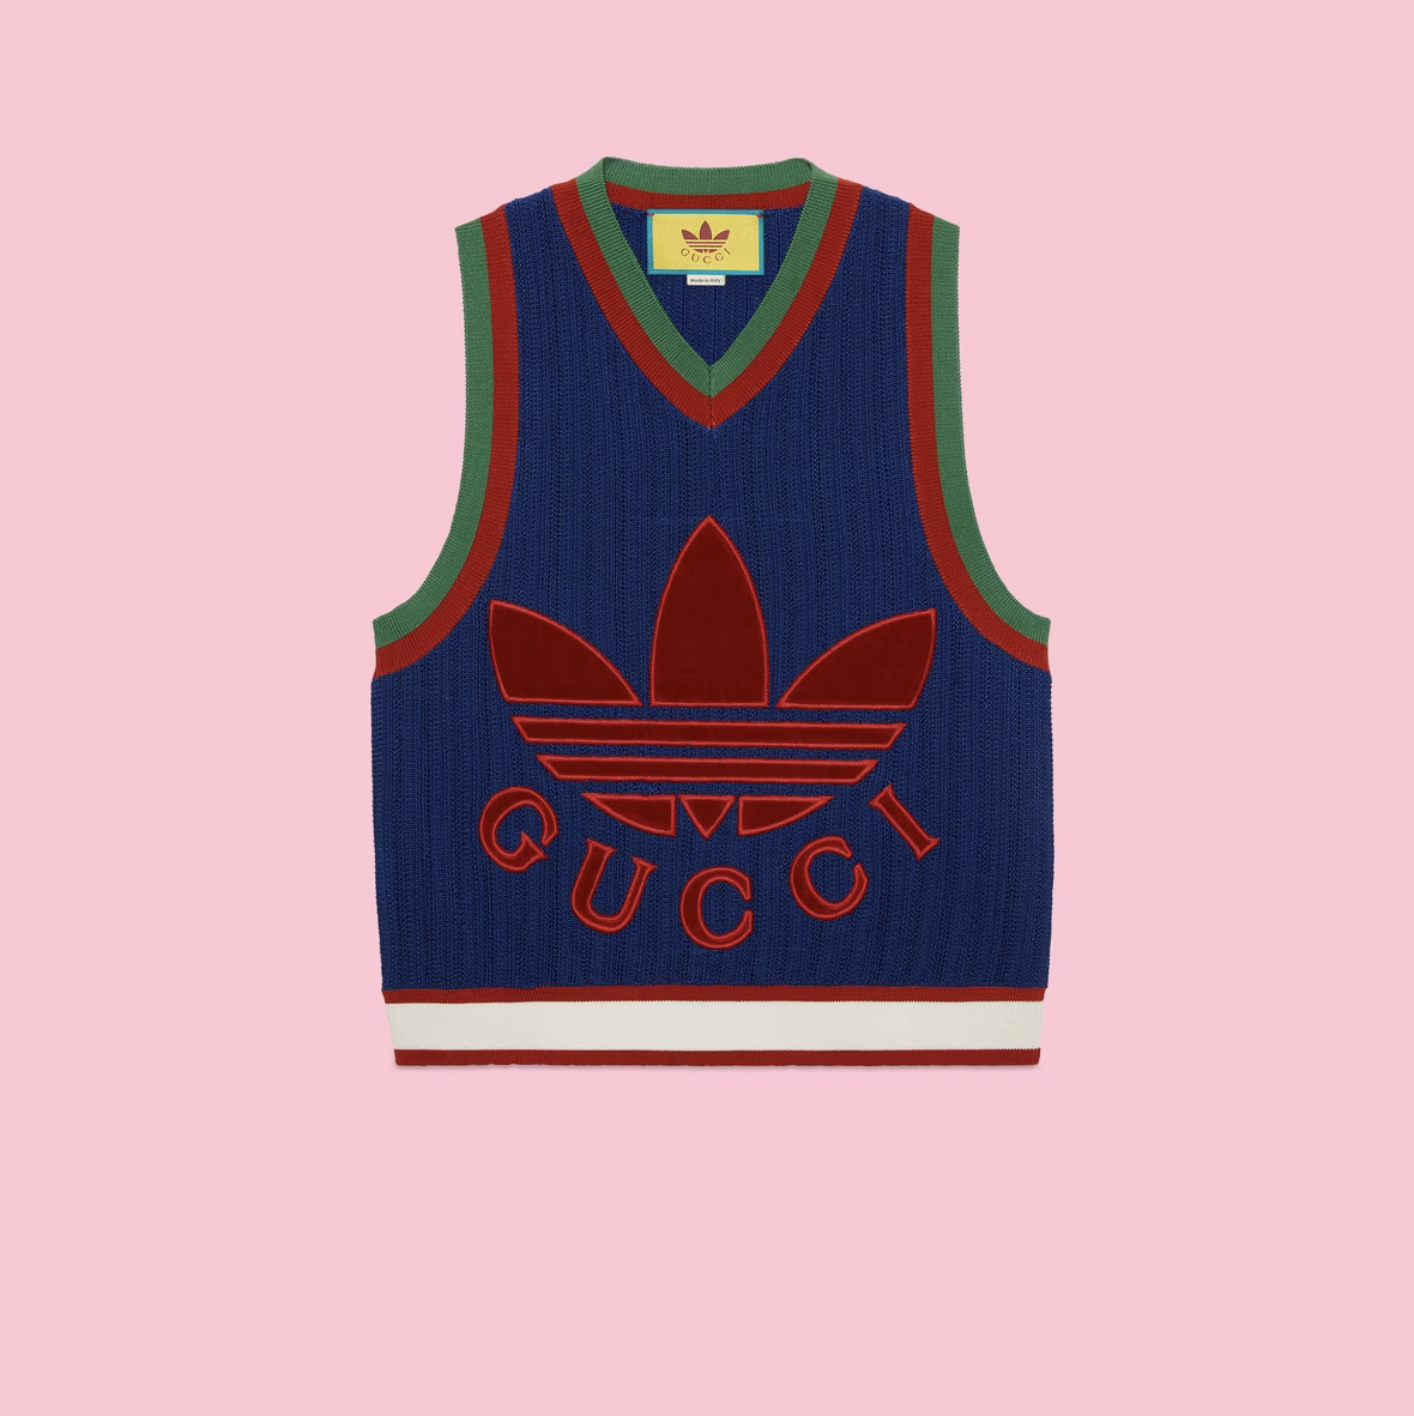 Gucci x Adidas Collection Just Dropped: What to Shop, Where to Buy